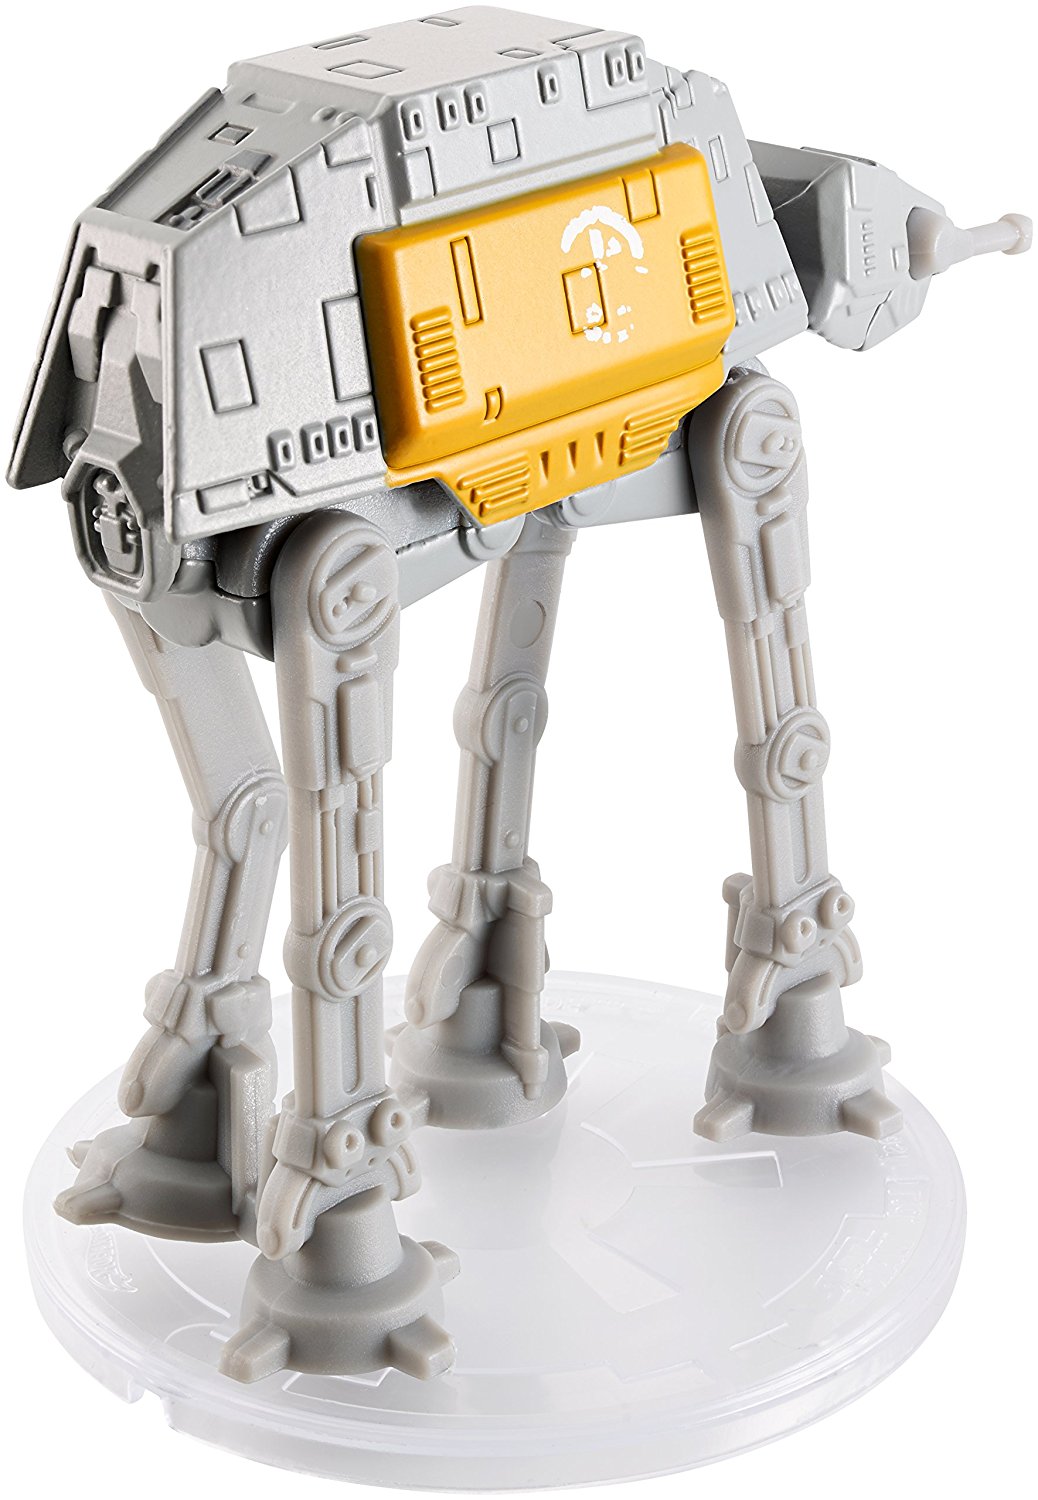 RO HW Imperial AT-ACT Walker Vehicle Toy 4